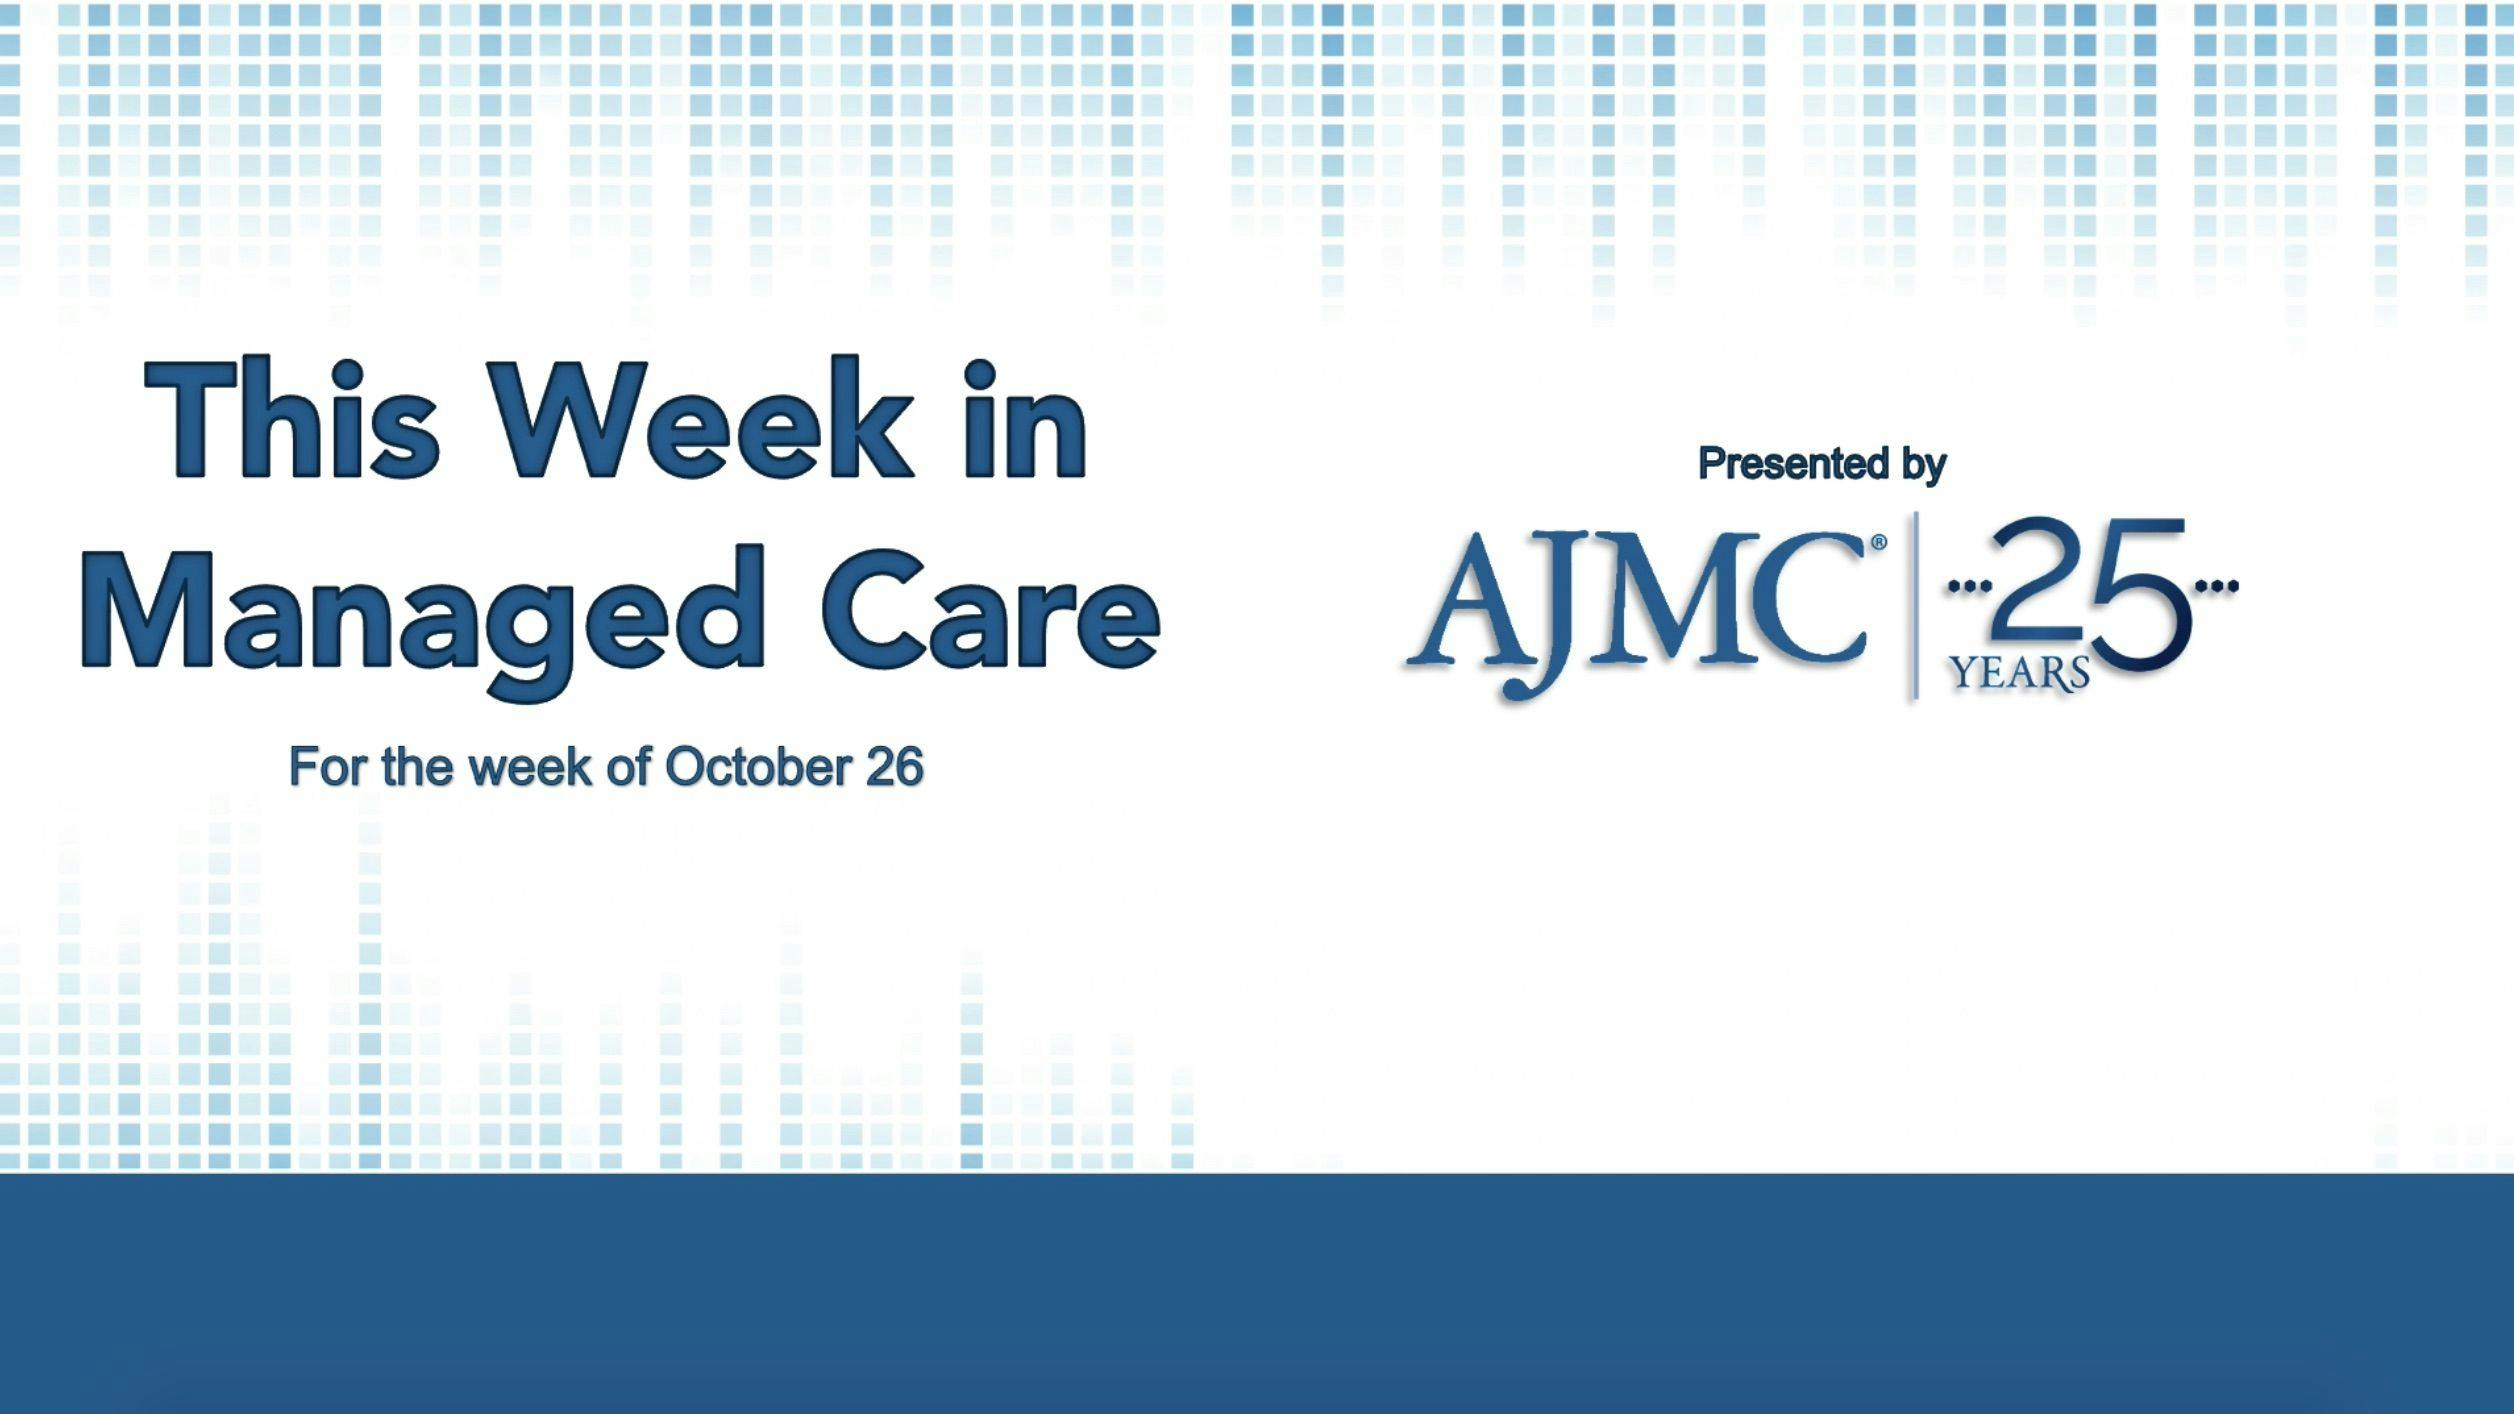 This Week in Managed Care: October 30, 2020